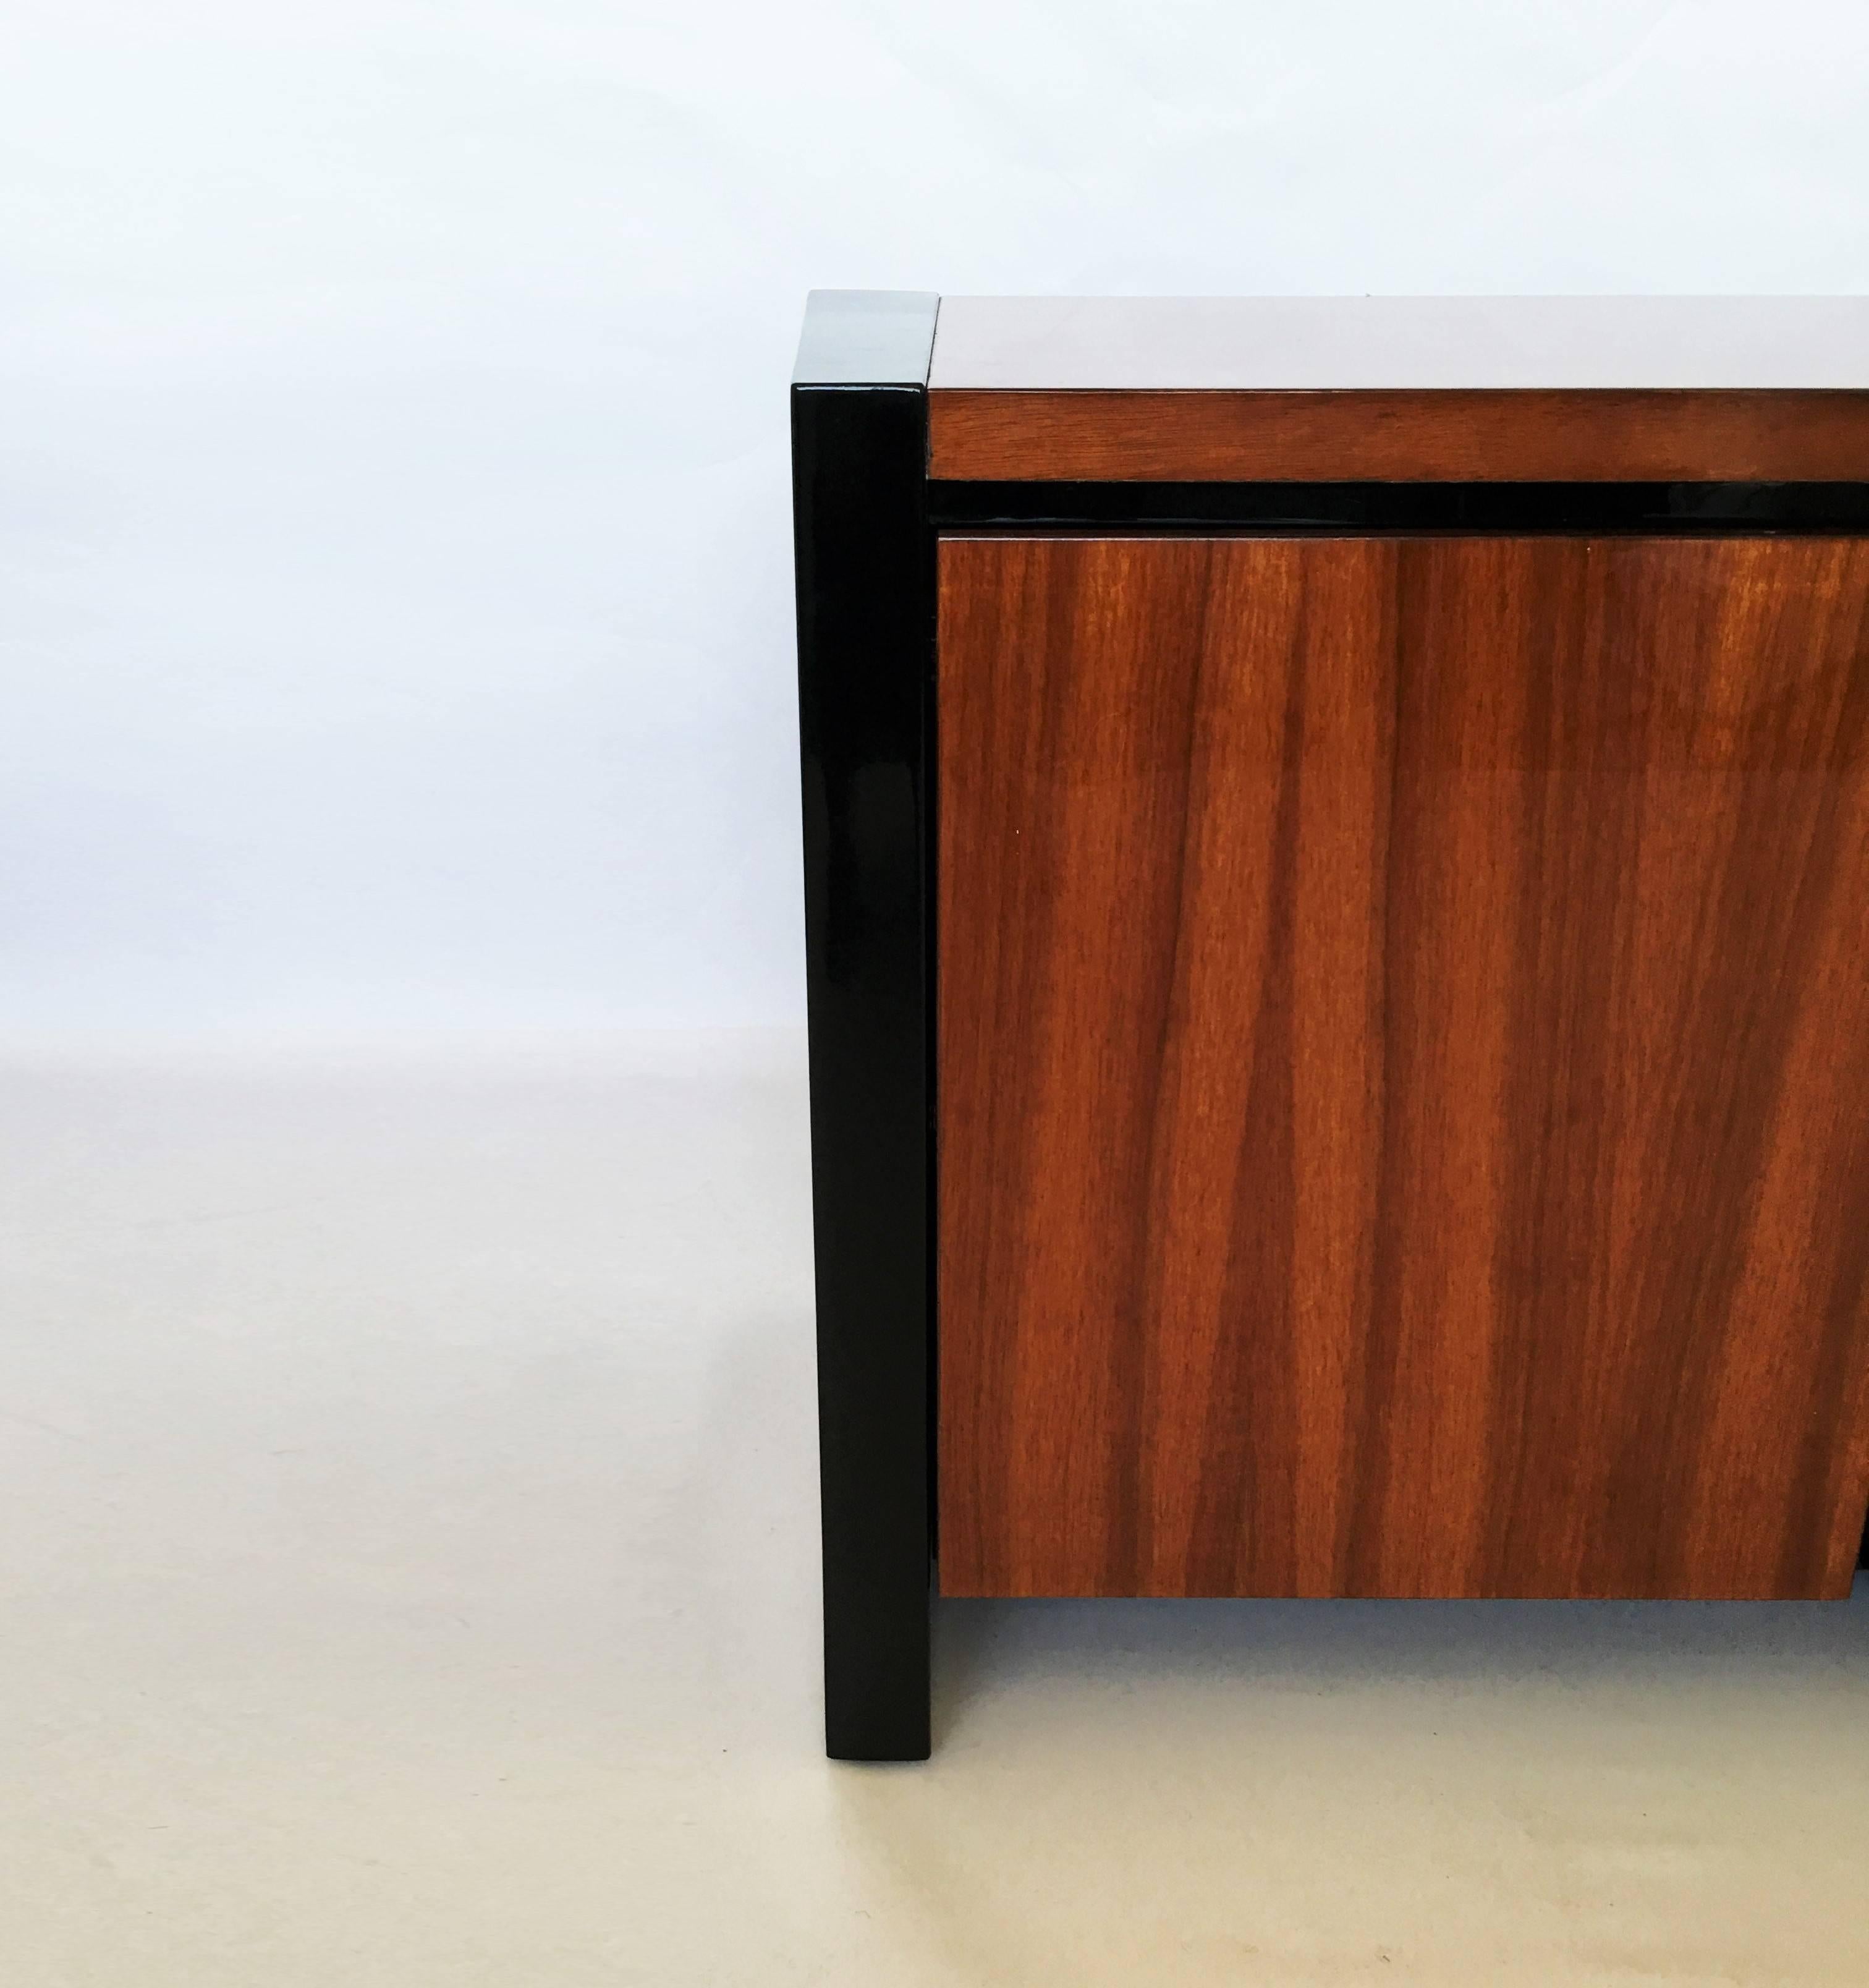 Pair of Black Lacquer and Koa Wood Nightstands by Henredon For Sale 4